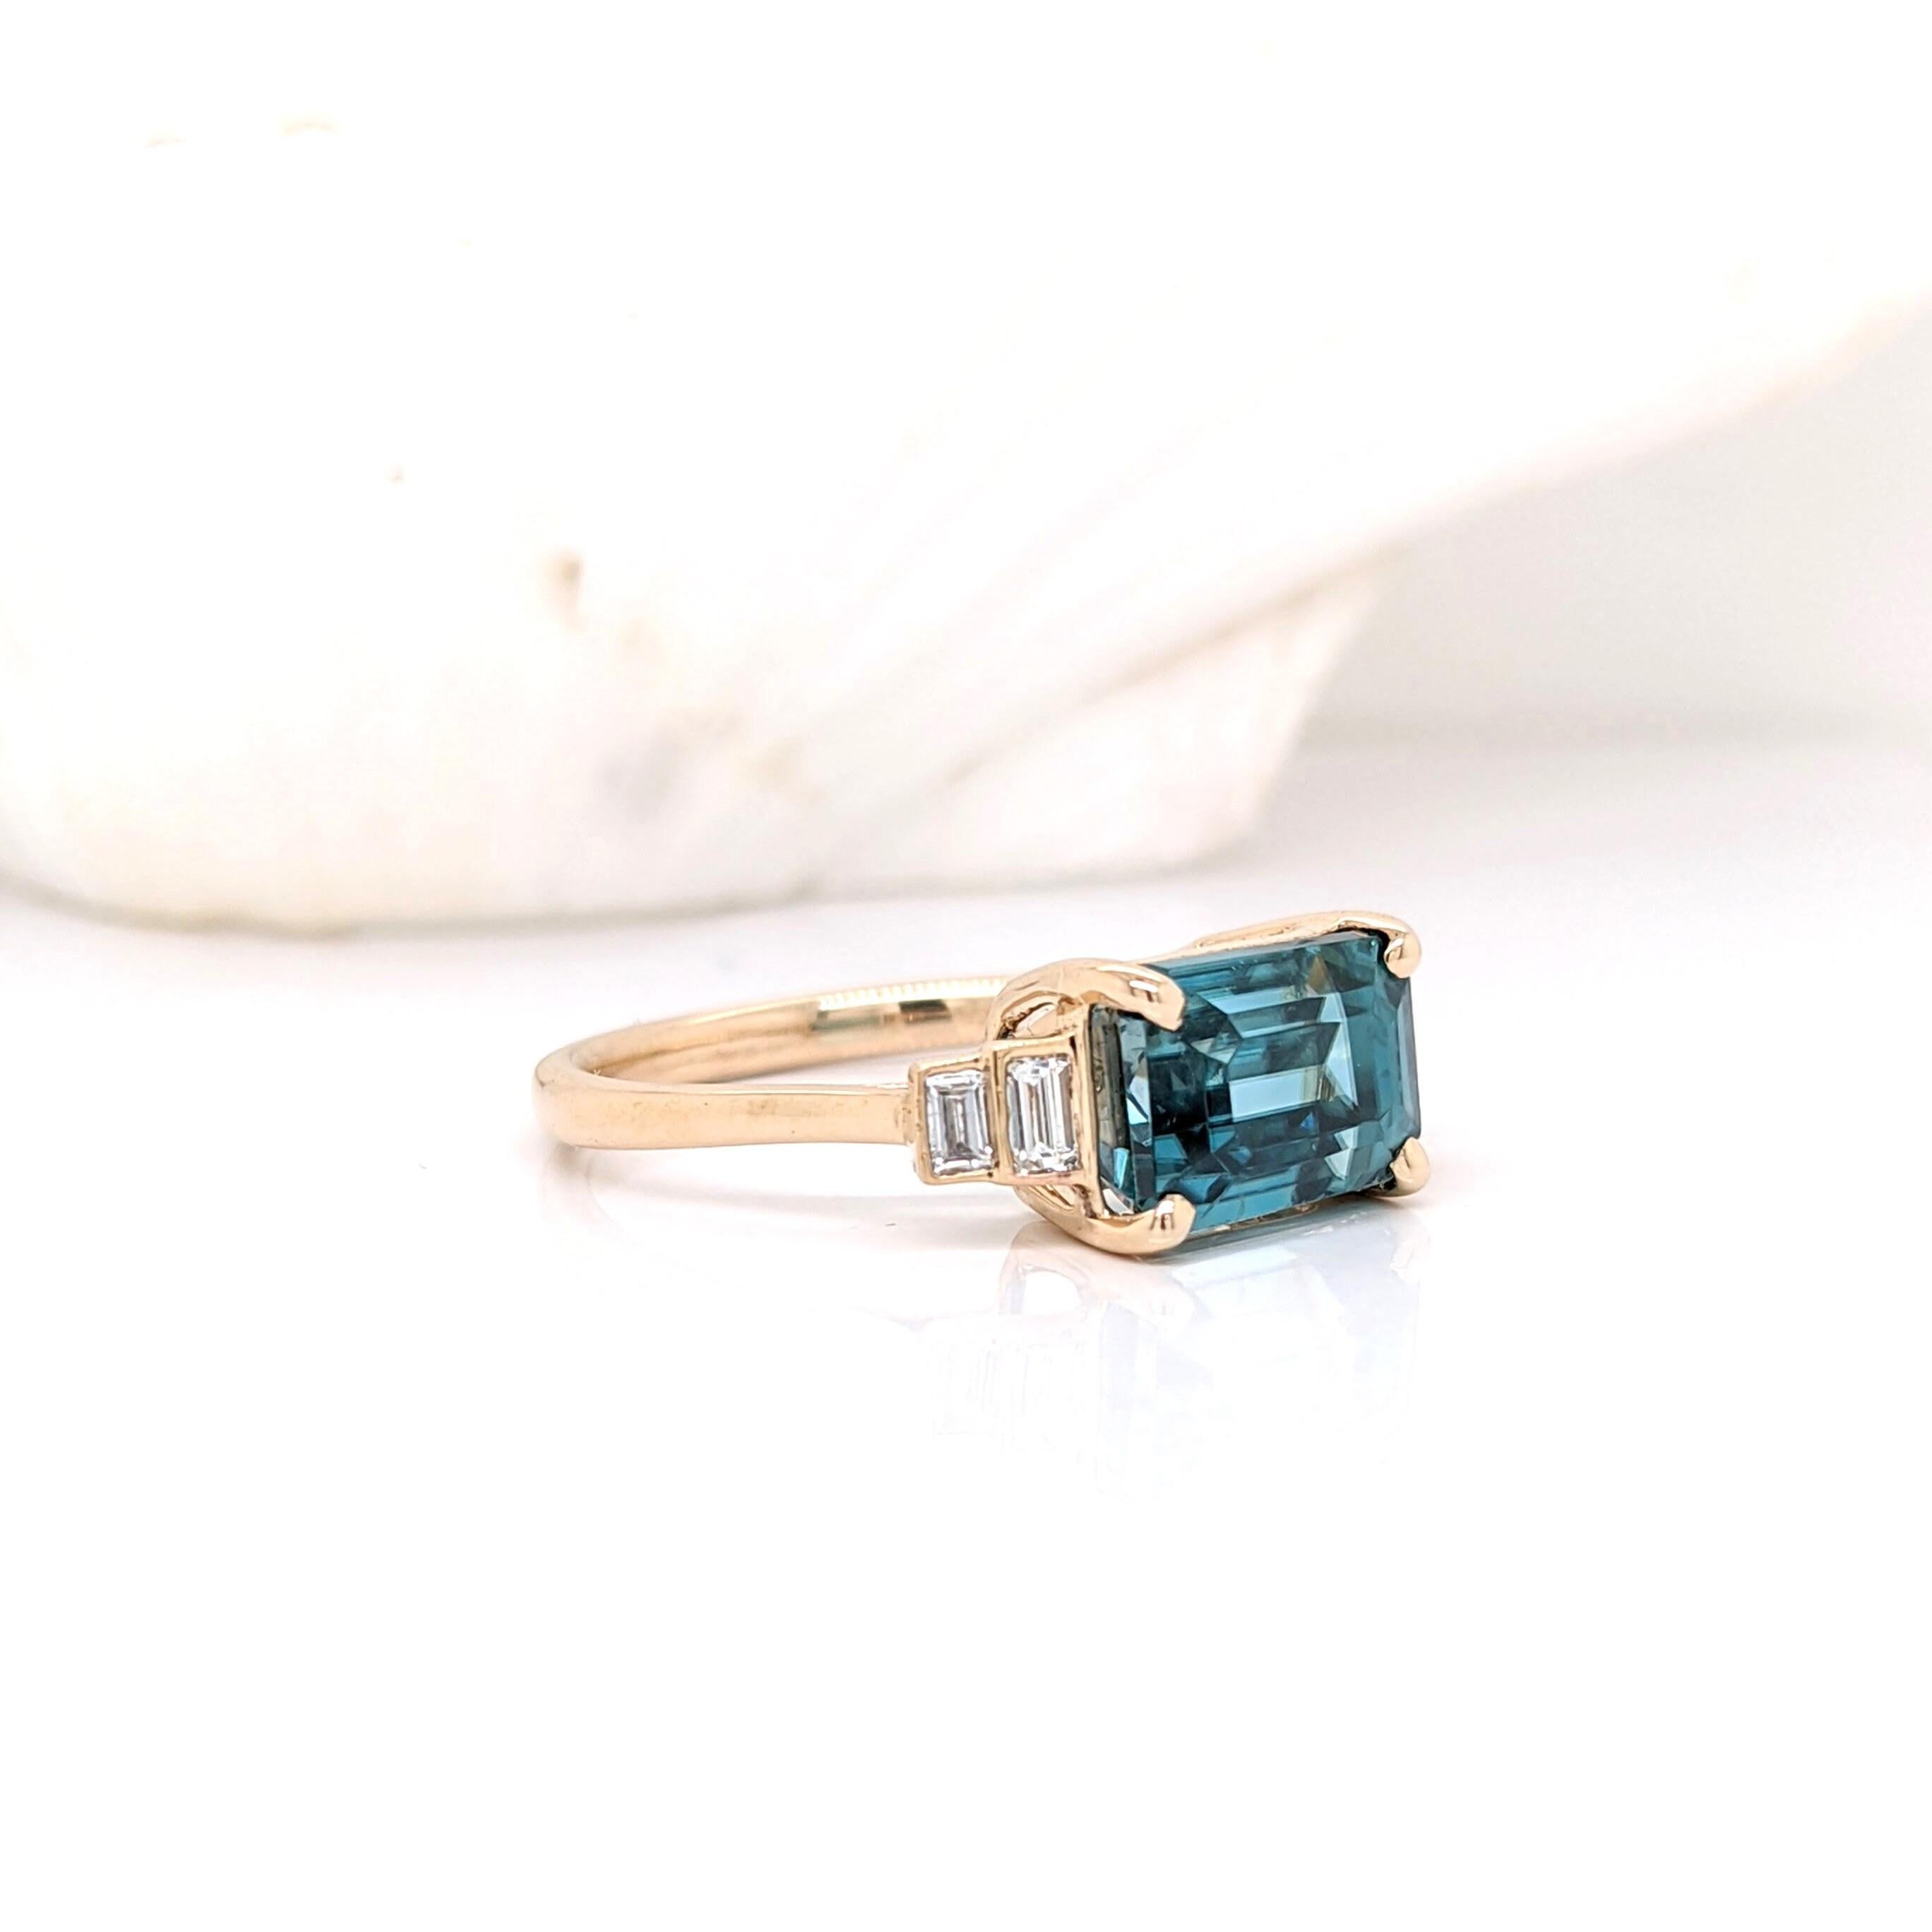 Specifications

Stone : Blue Zircon
Origin : Cambodia
Hardness : 7.5
Treatment : Heated
Shape : Emerald Cut
Size : 9x6.5mm
Weight : 4.77cts
Metal : 14k/2.38gms
Diamonds SI/GH : 0.21cts

Sku: AJR709/2593

As listed, this ring is ready to ship. If